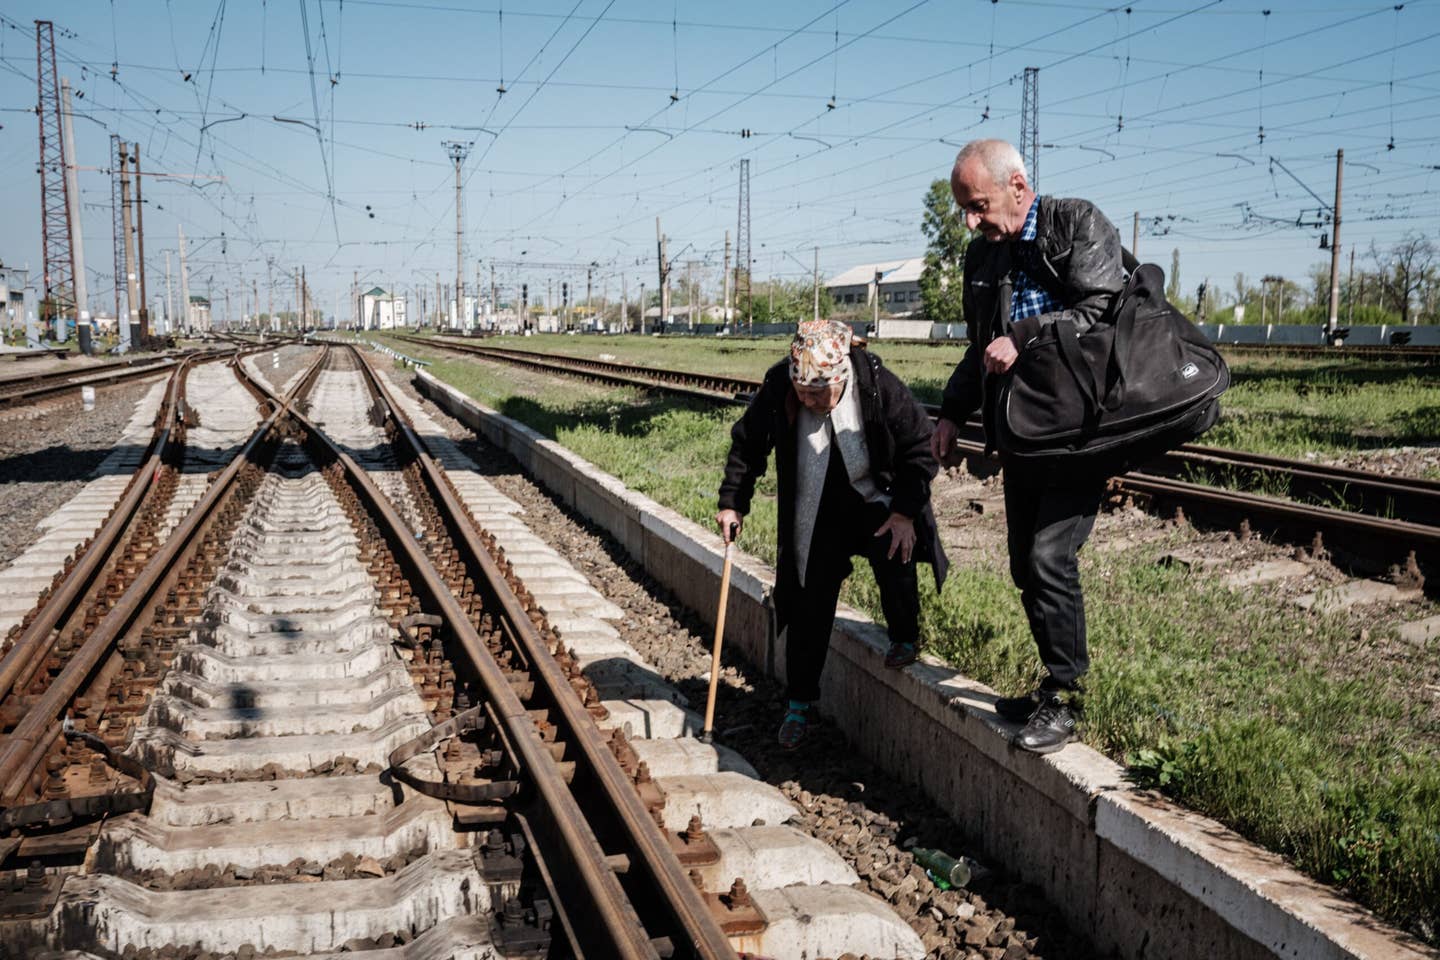 Because Ukraine's train tracks are slightly wider than those of other European nations, the delivery of grain by rail is costly and time-consuming. (Photo by YASUYOSHI CHIBA/AFP via Getty Images)